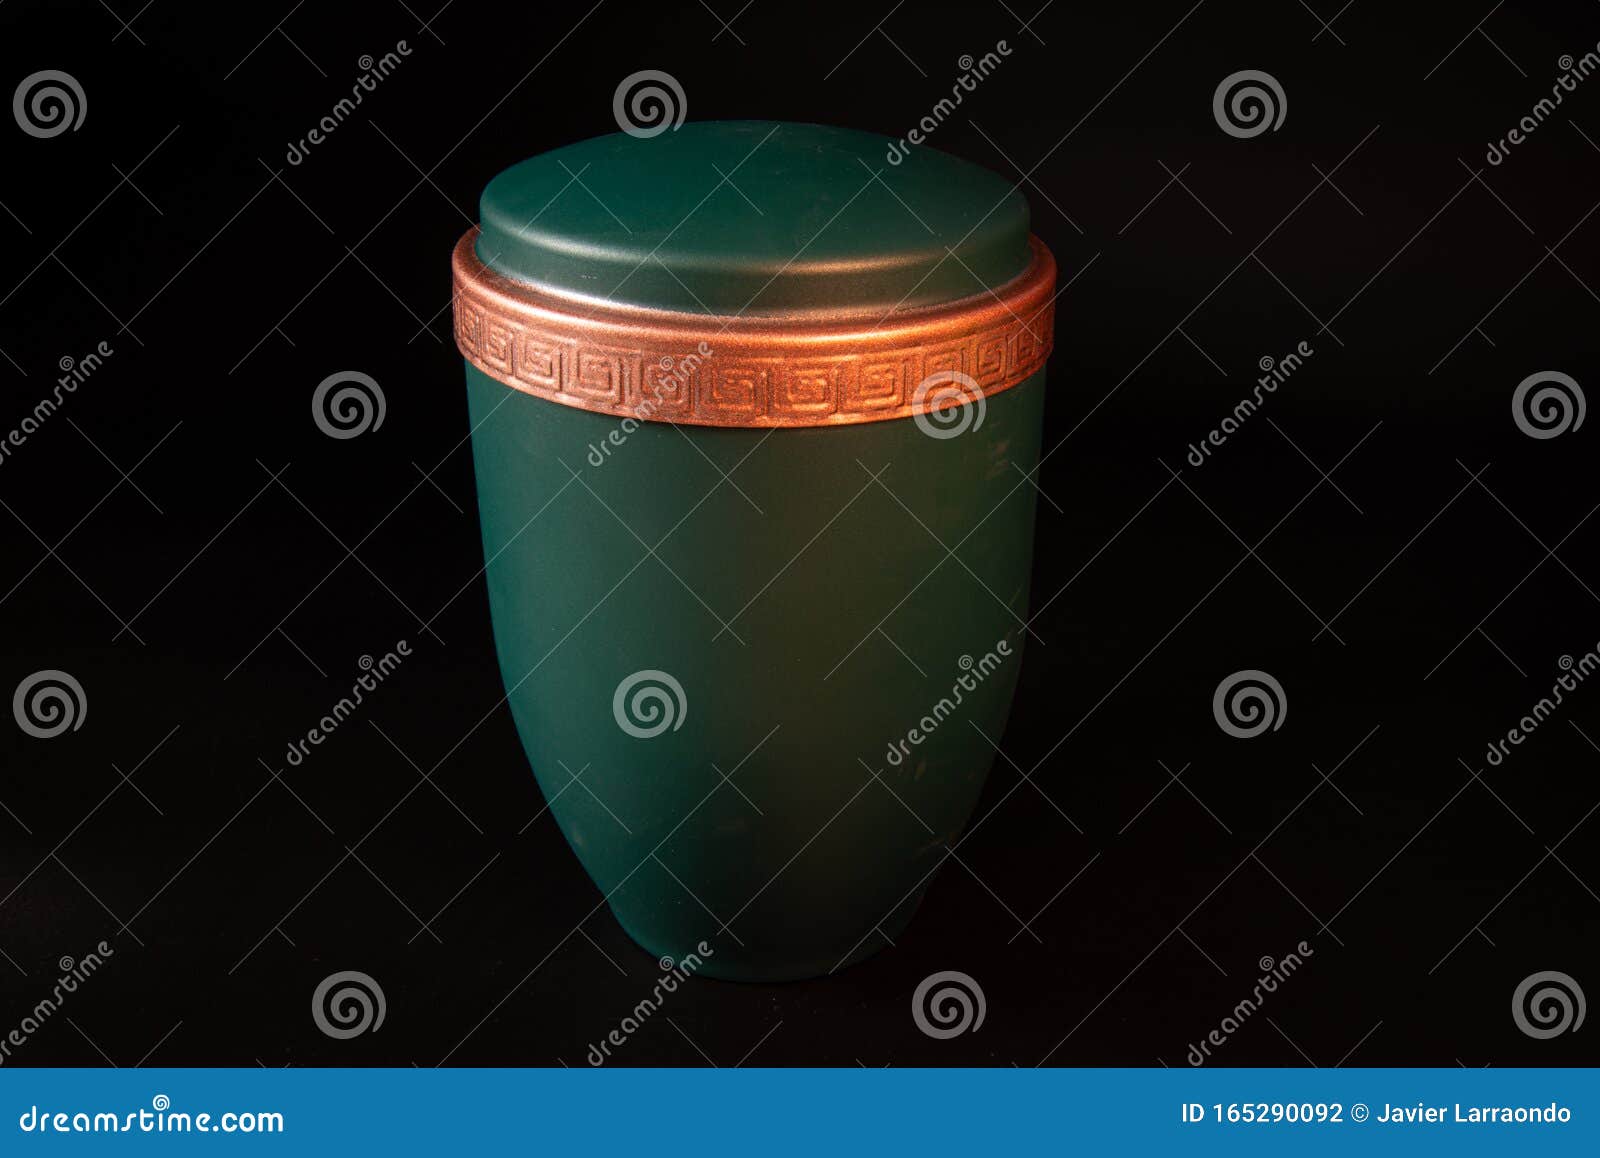 green urn with golden edge 